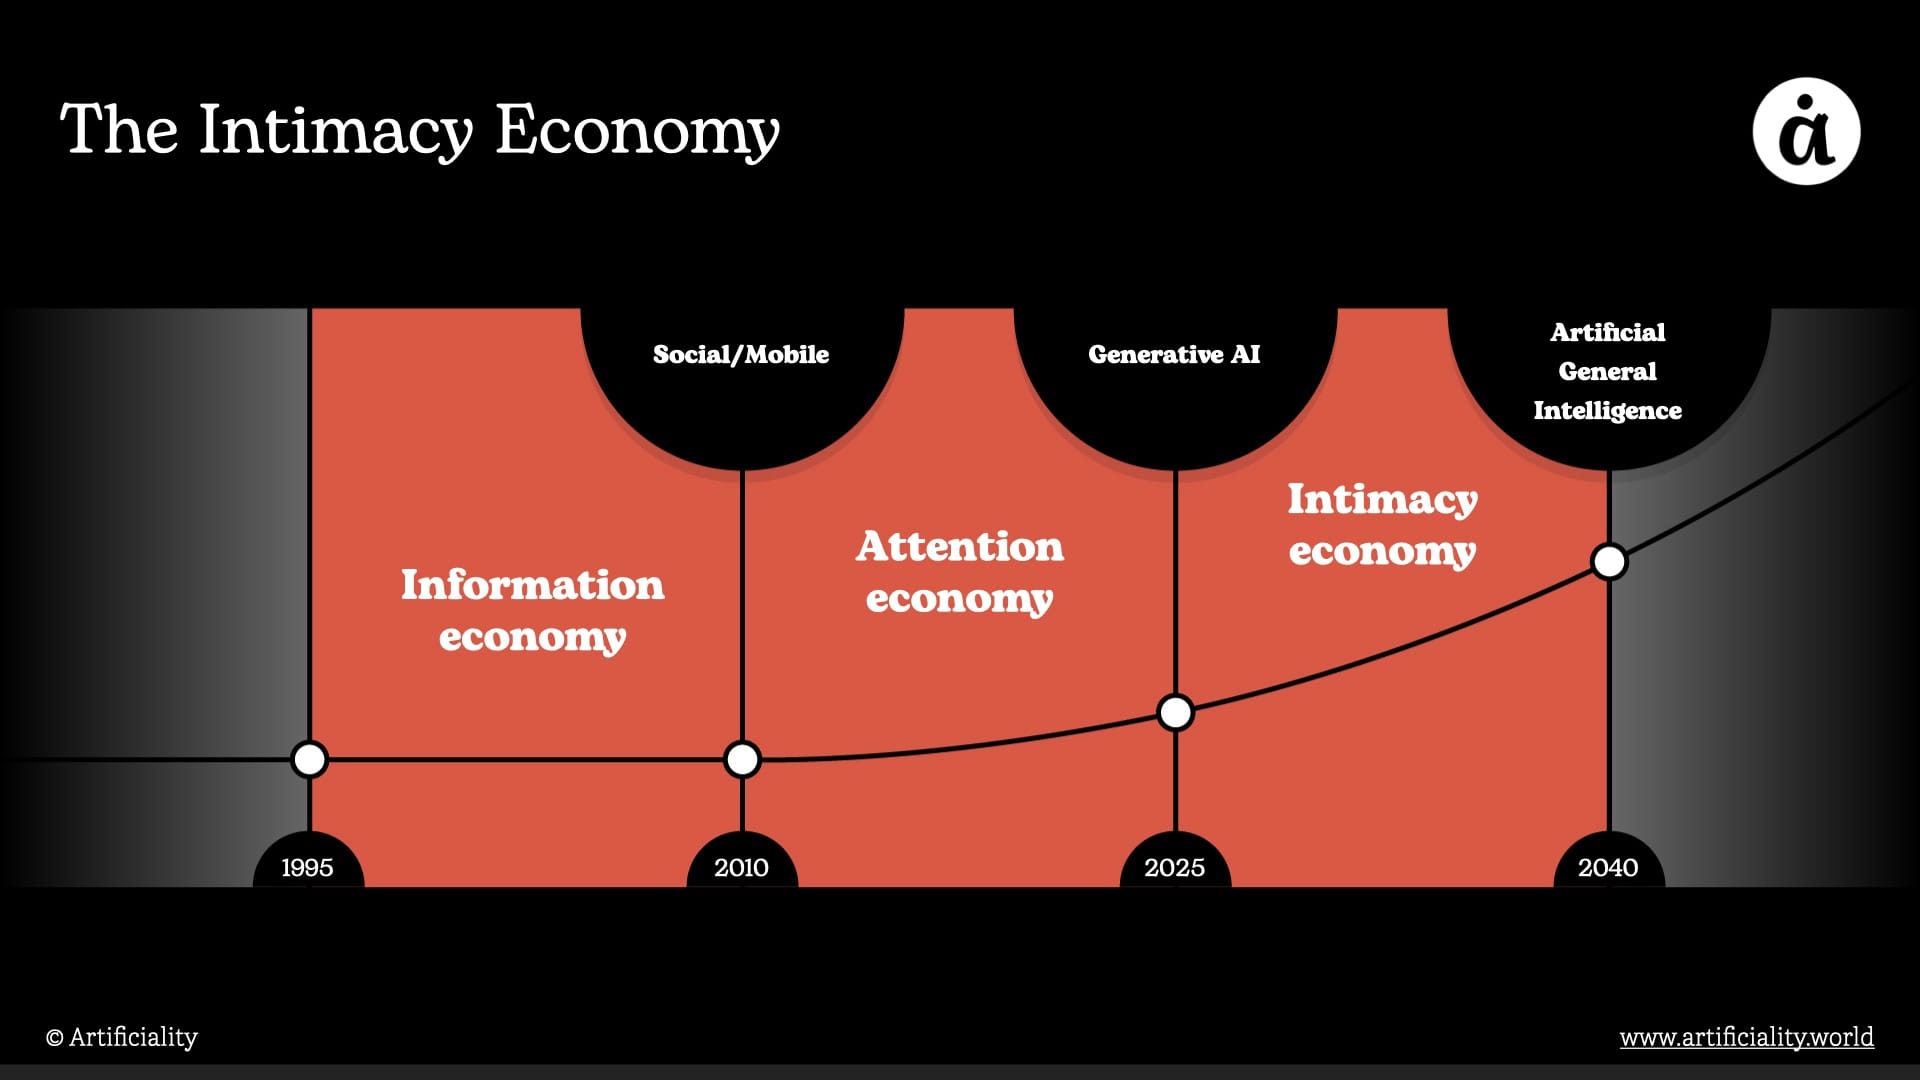 The intimacy economy: from information to attention to intimacy